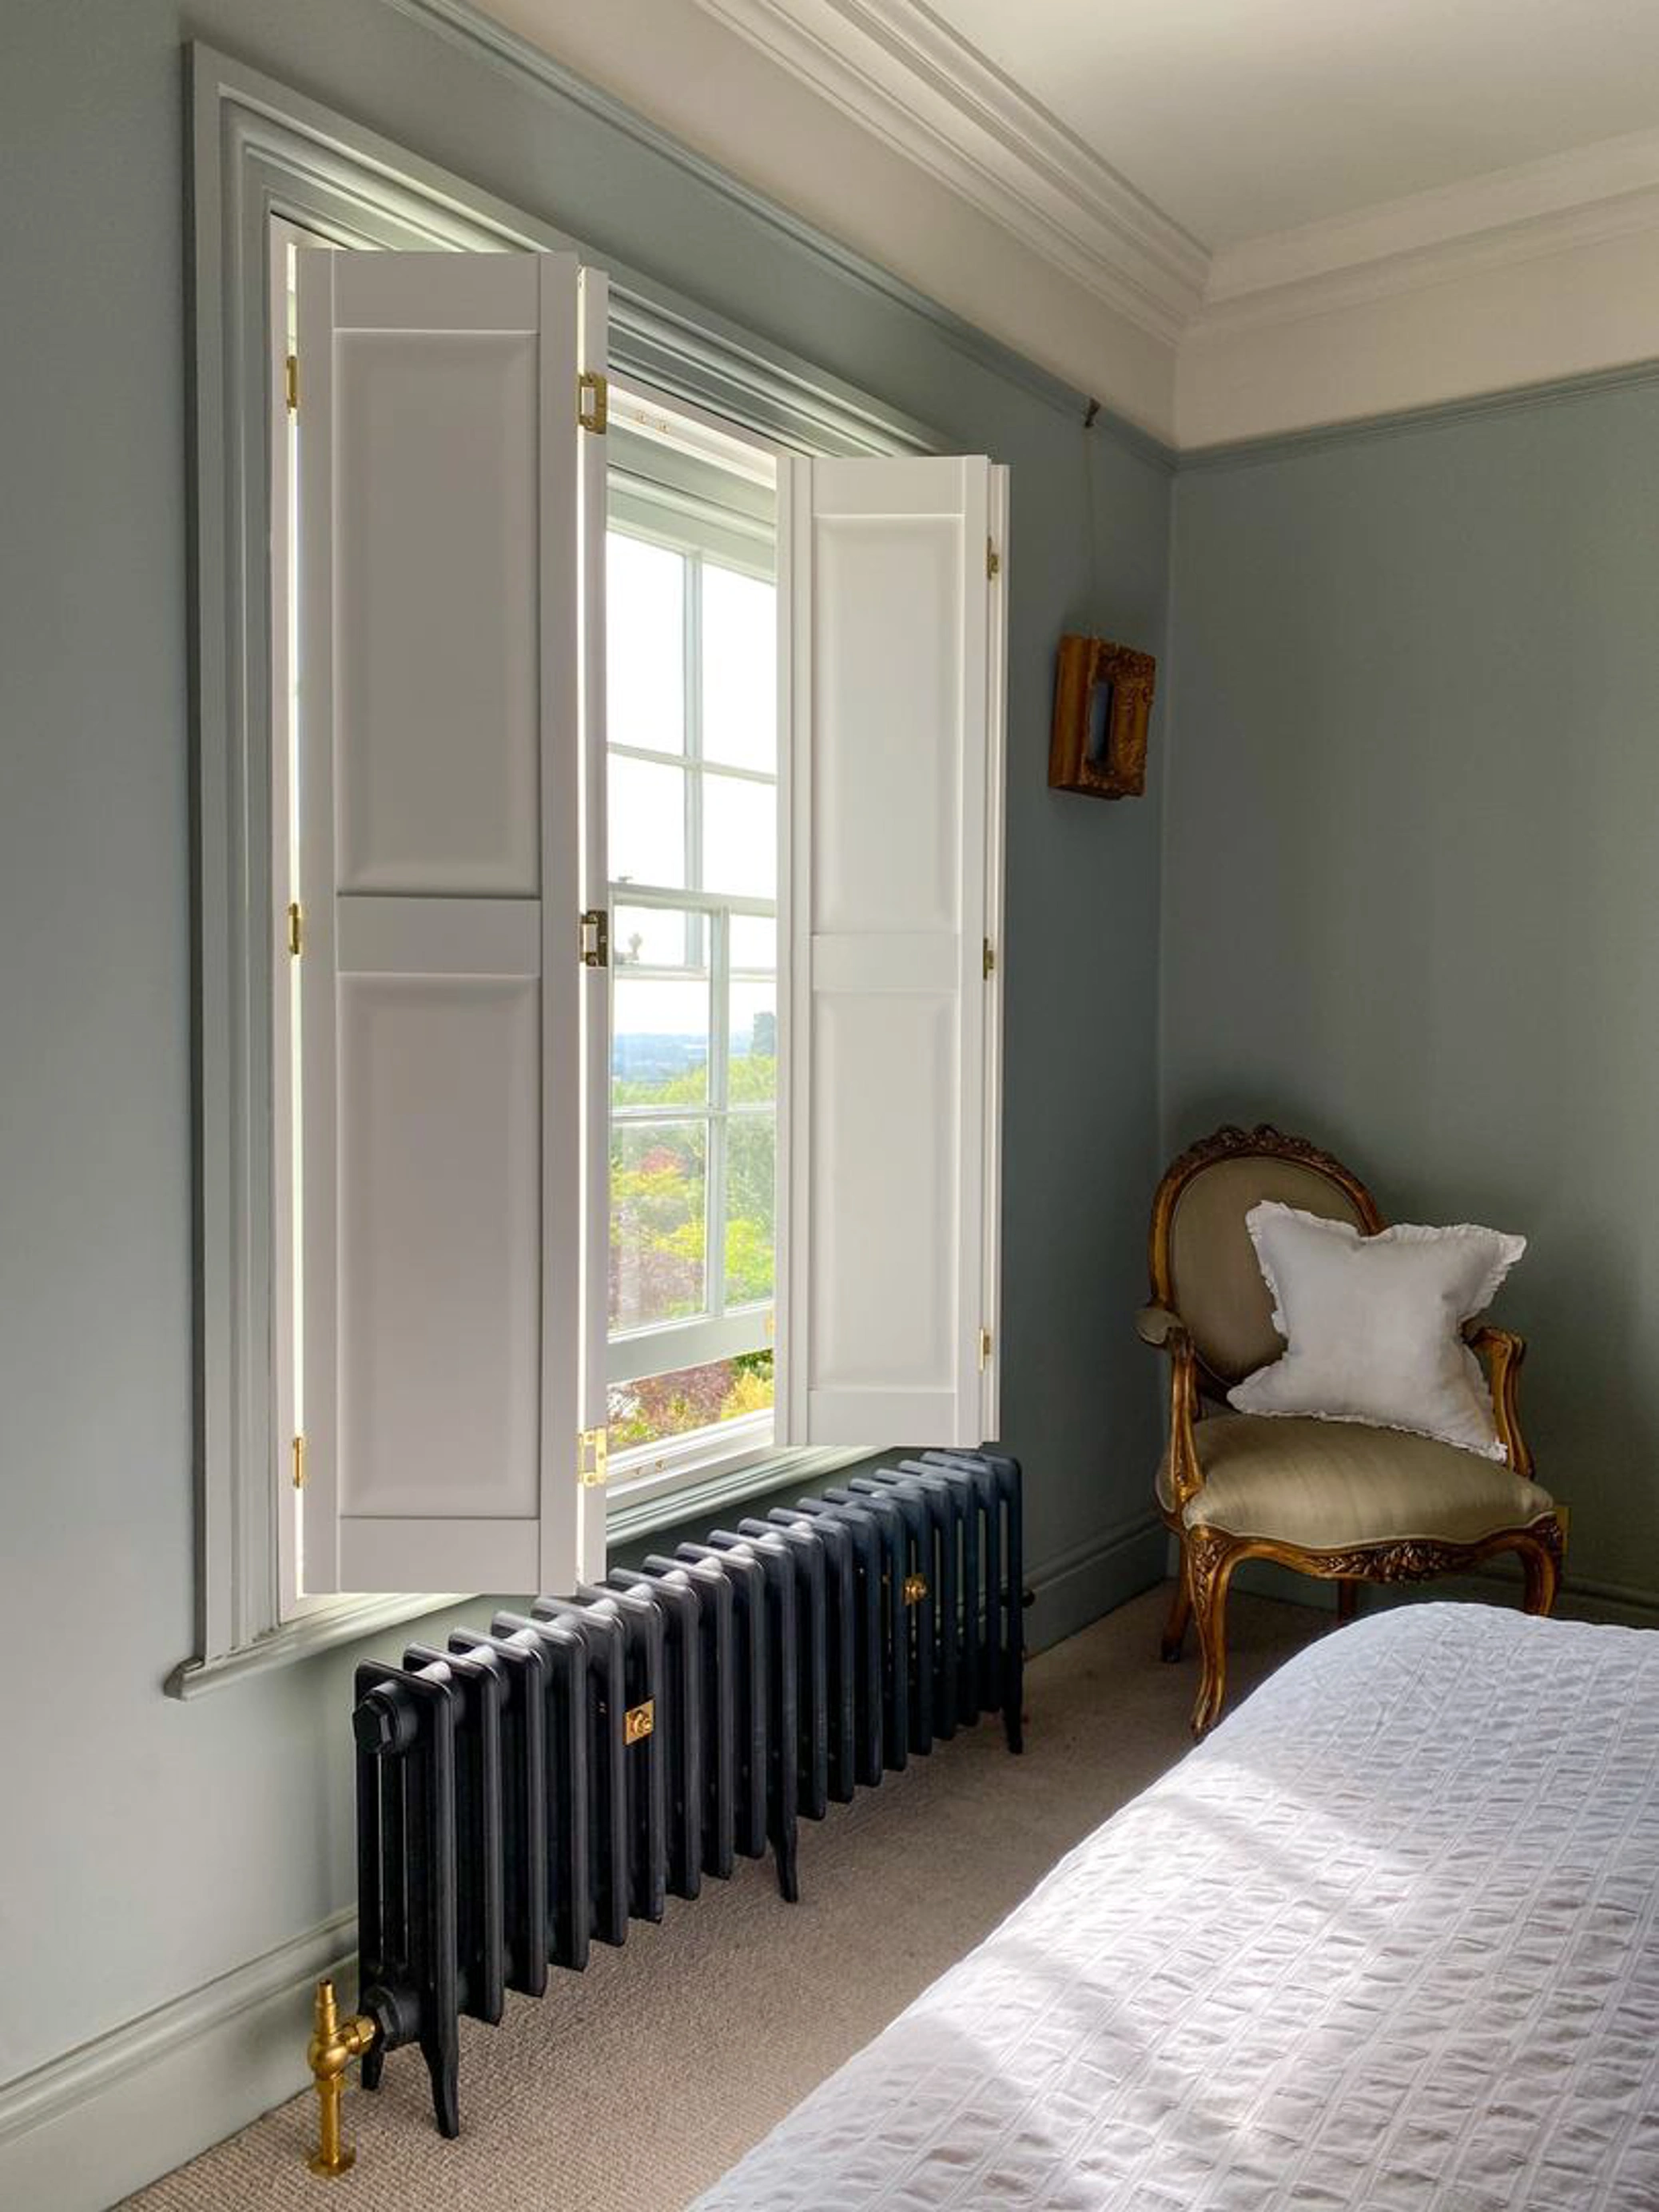 Vivid White solid raised wooden shutters and black radiator in bedroom